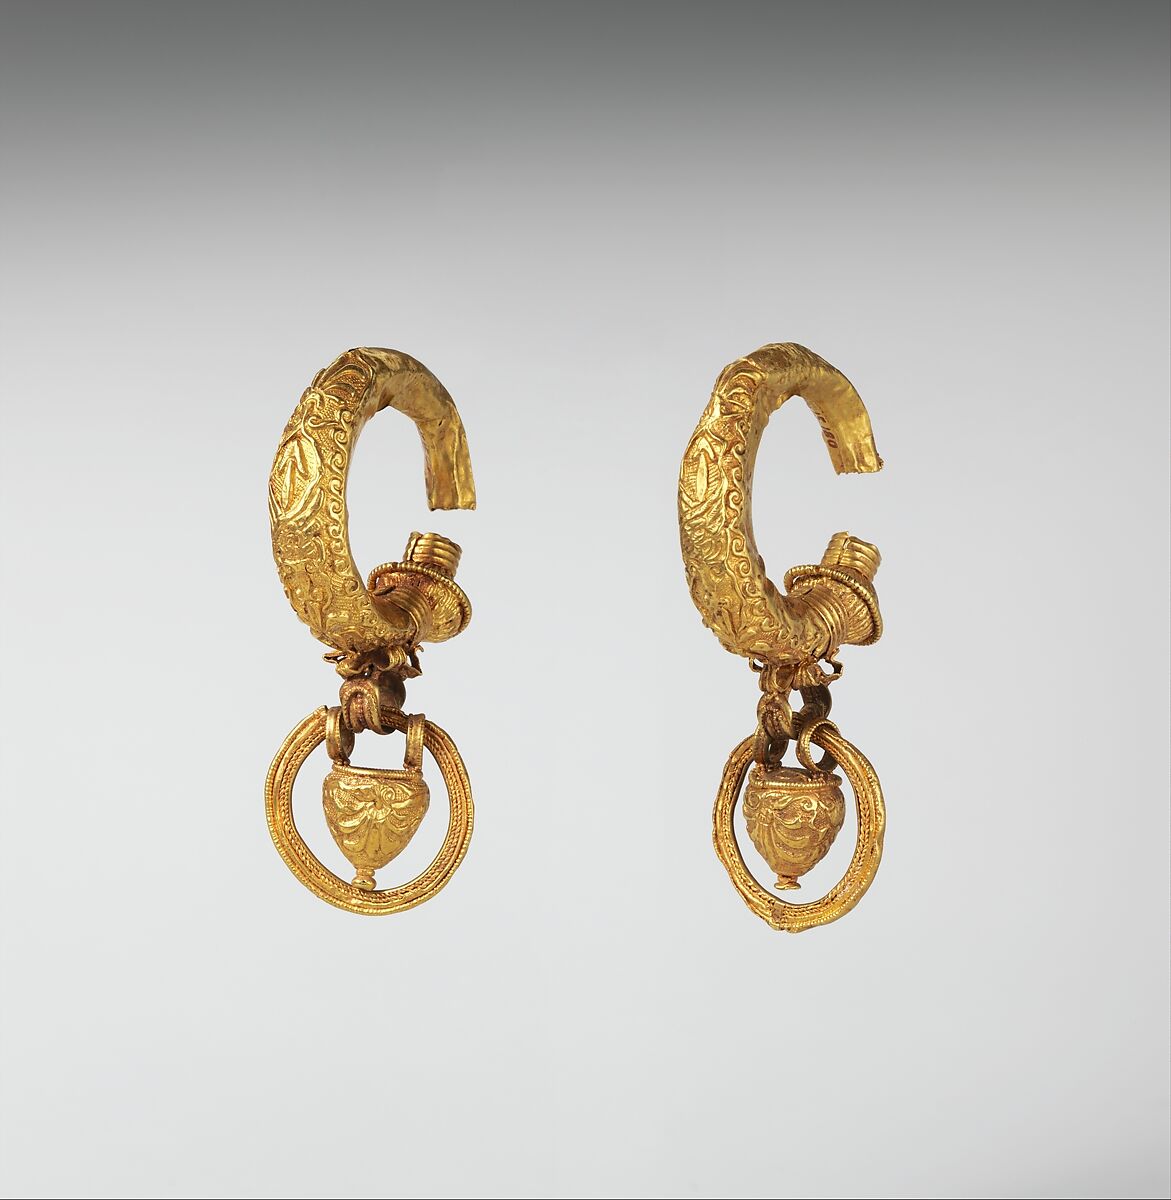 Gold earrings with pendant vase and ring, Gold, Etruscan 